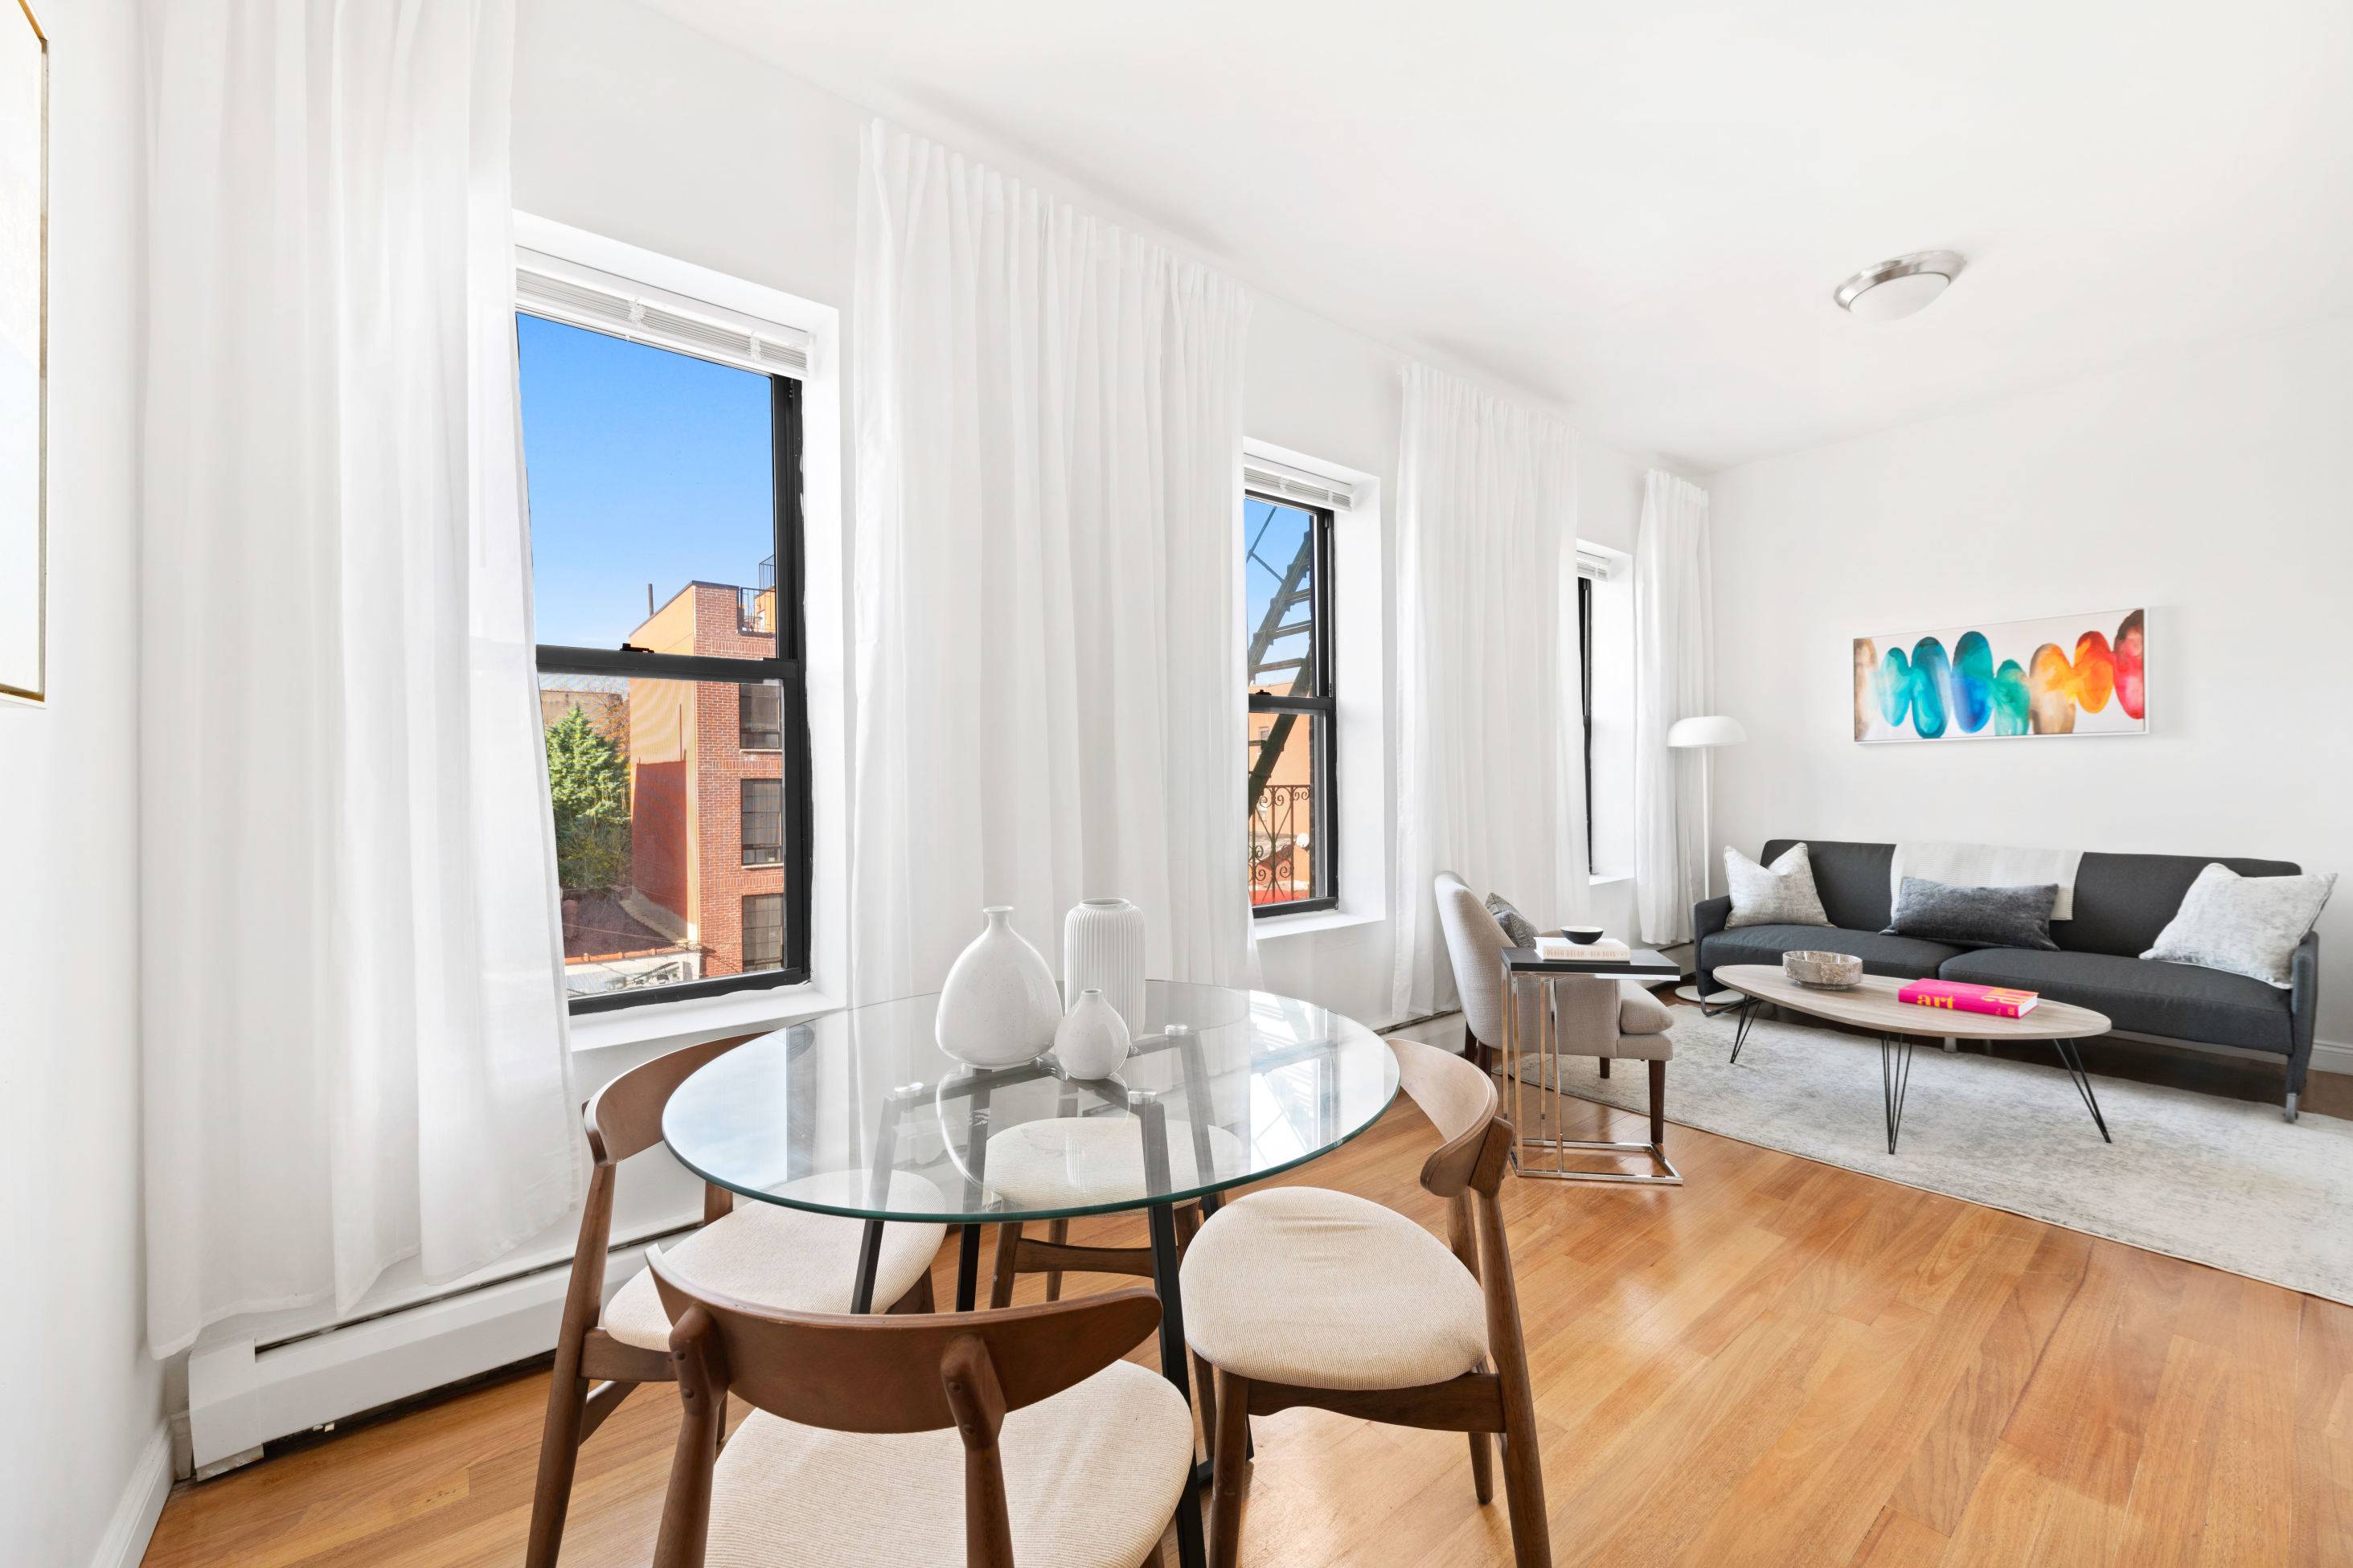 Be the first to live in this freshly renovated 2BR apartment in prime BedStuy.